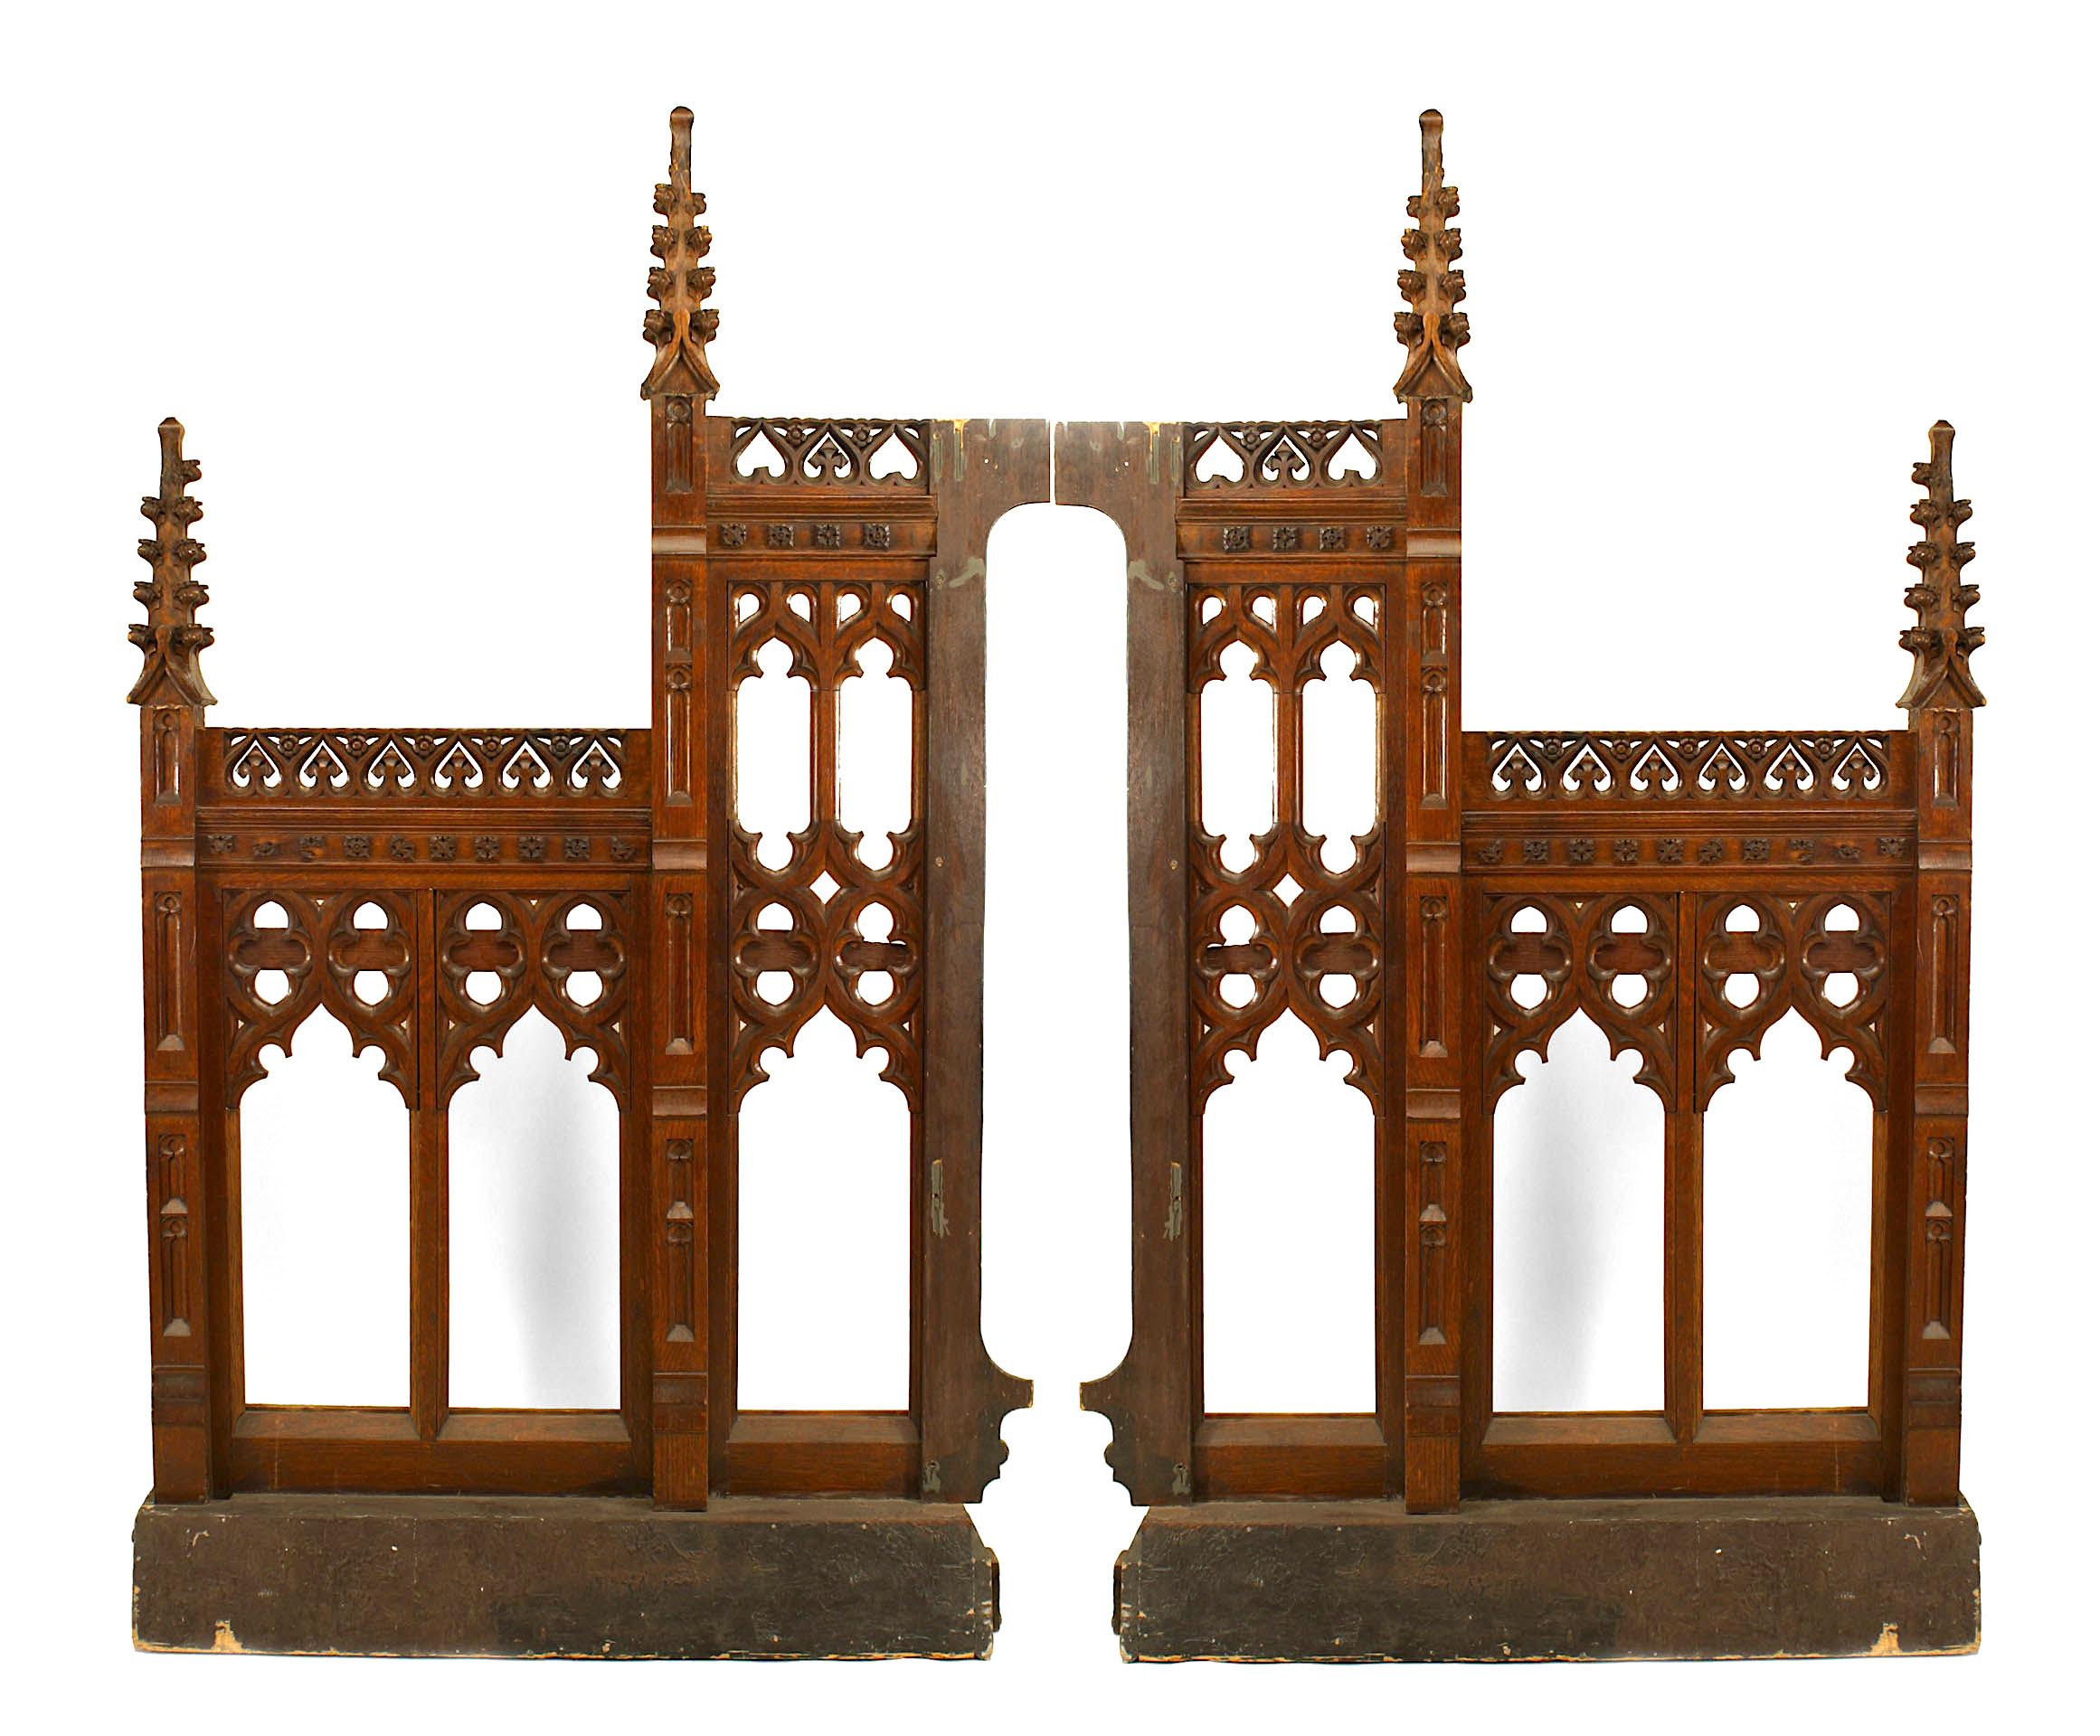 Pair of English Gothic Revival style (19th Century) oak carved railing panels with open design and finial (PRICED AS Pair).
